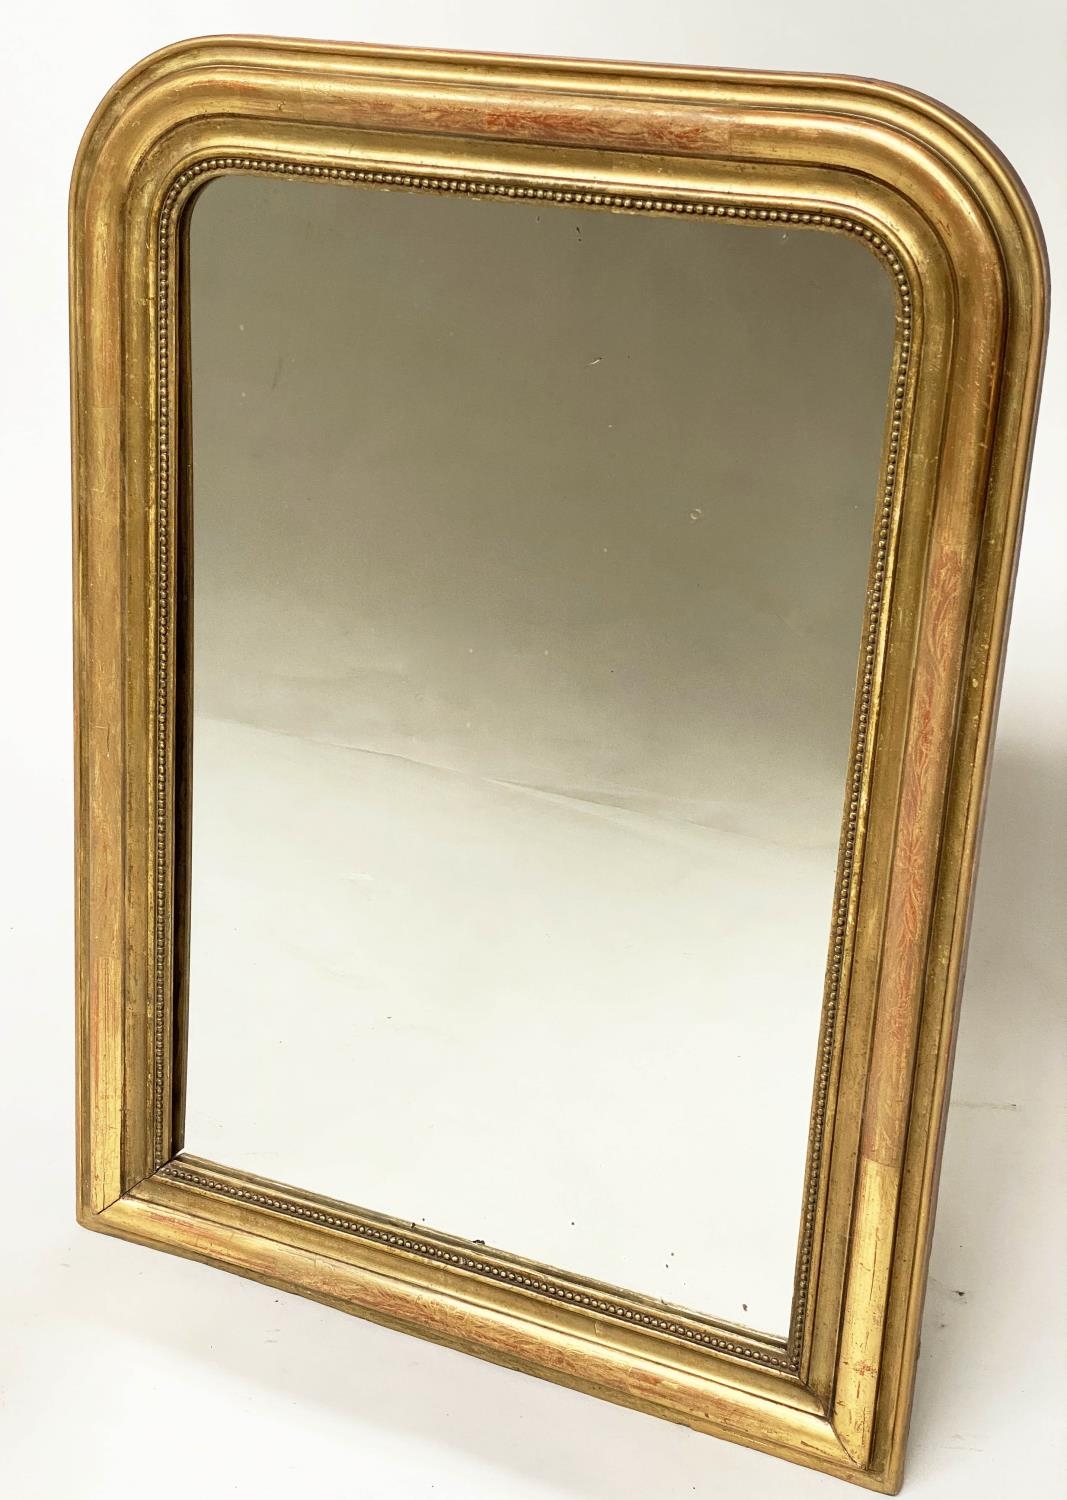 OVERMANTEL, 19th century French giltwood and gesso with arched beaded and incised frame, 74cm W x - Image 2 of 8